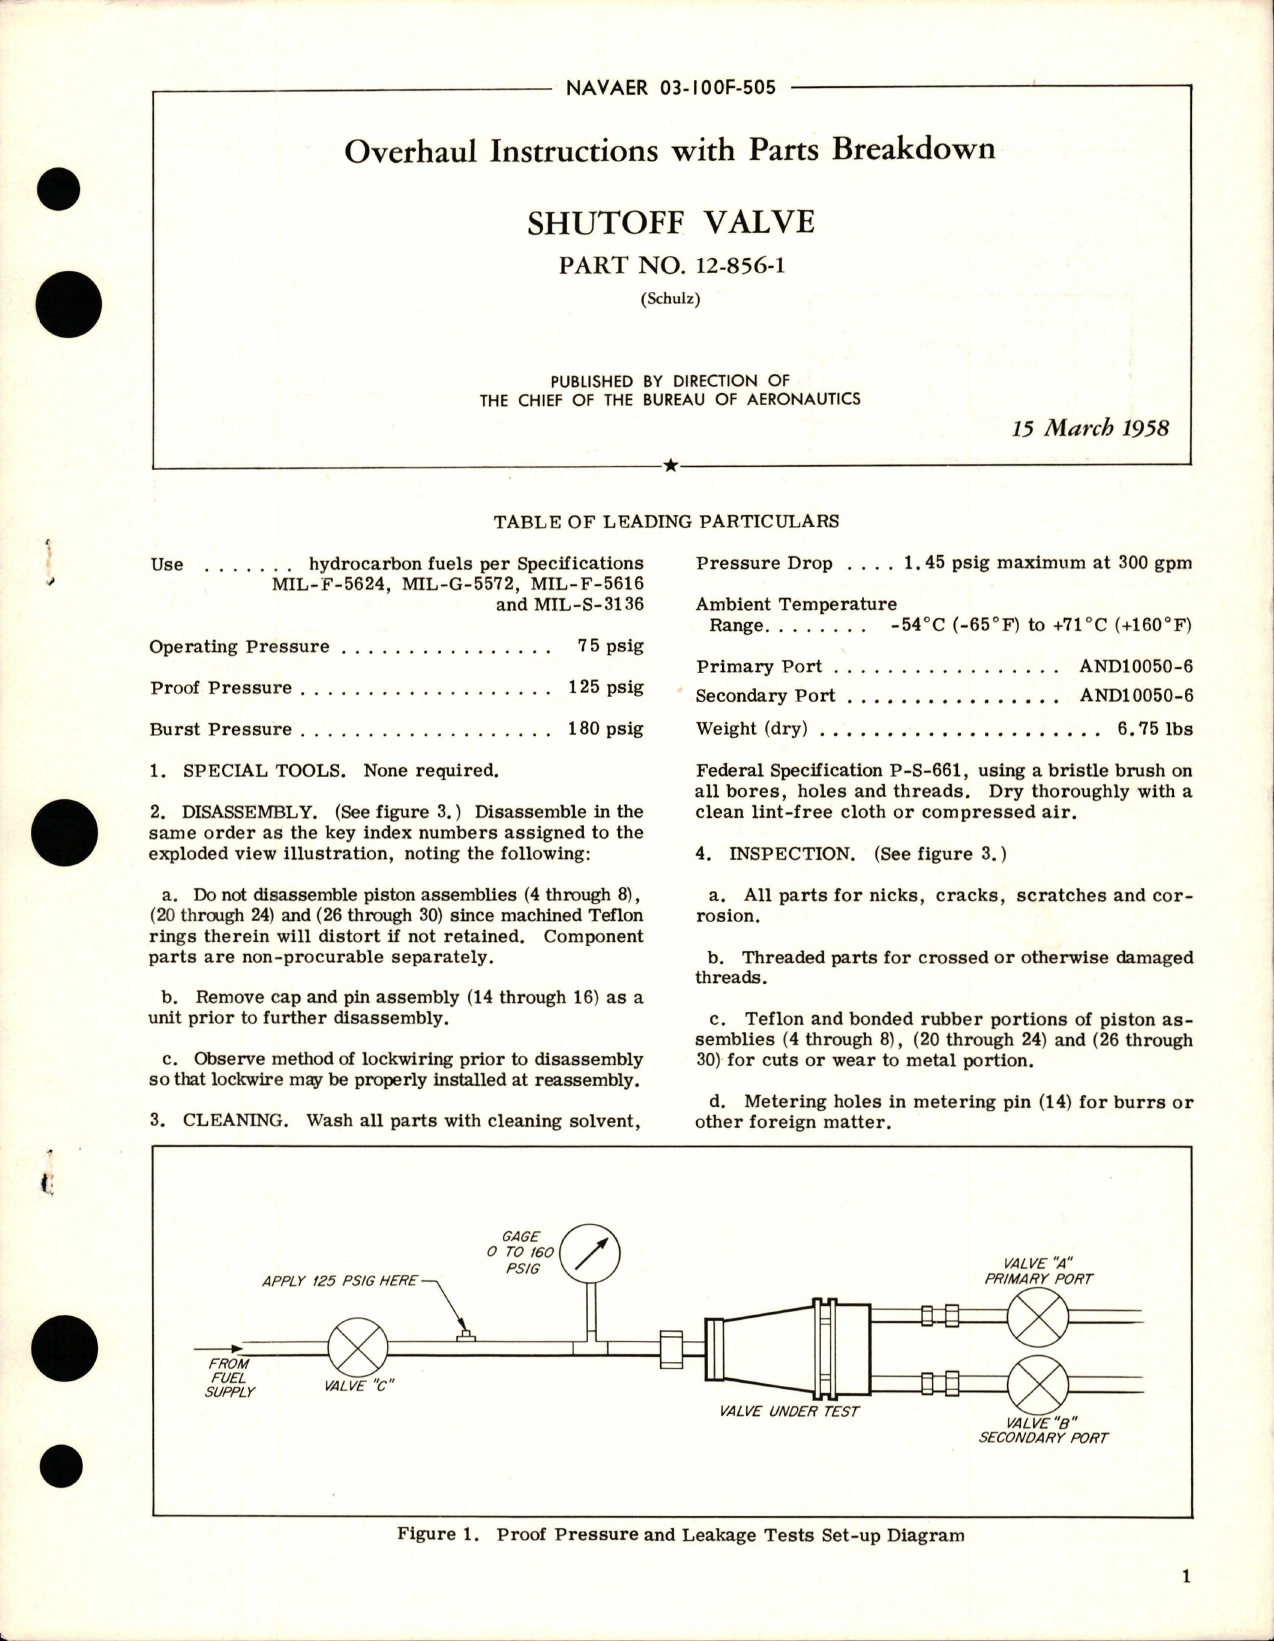 Sample page 1 from AirCorps Library document: Overhaul Instructions with Parts Breakdown for Shutoff Valve - Part 12-856-1